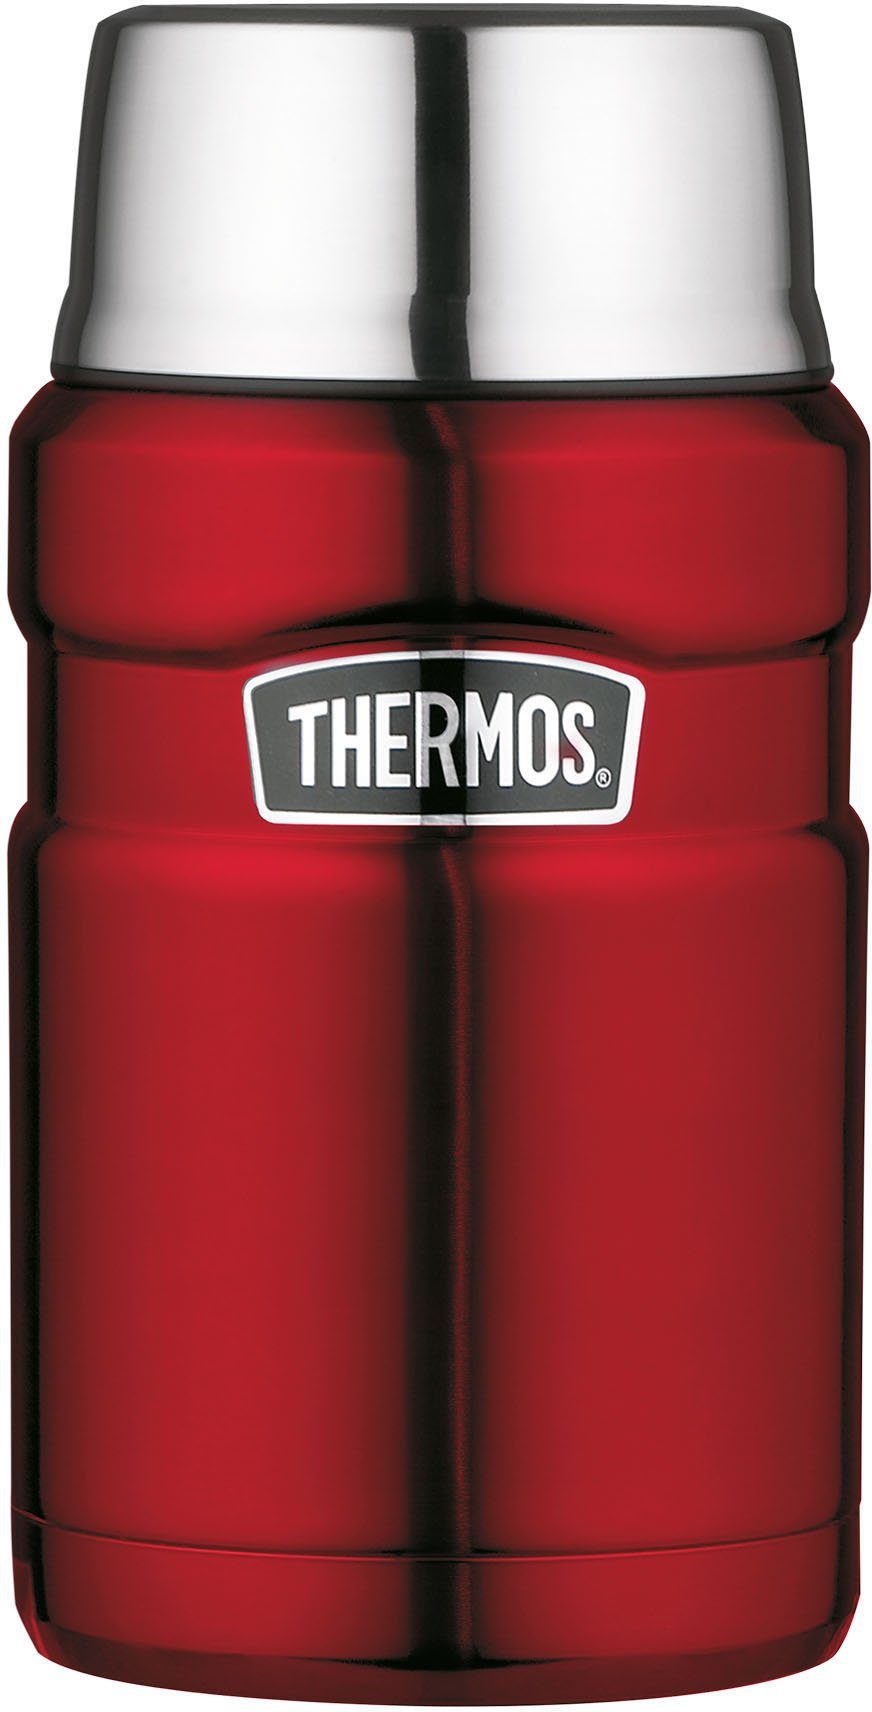 Stainless THERMOS rot Thermobehälter 710 King, (1-tlg), ml Edelstahl,